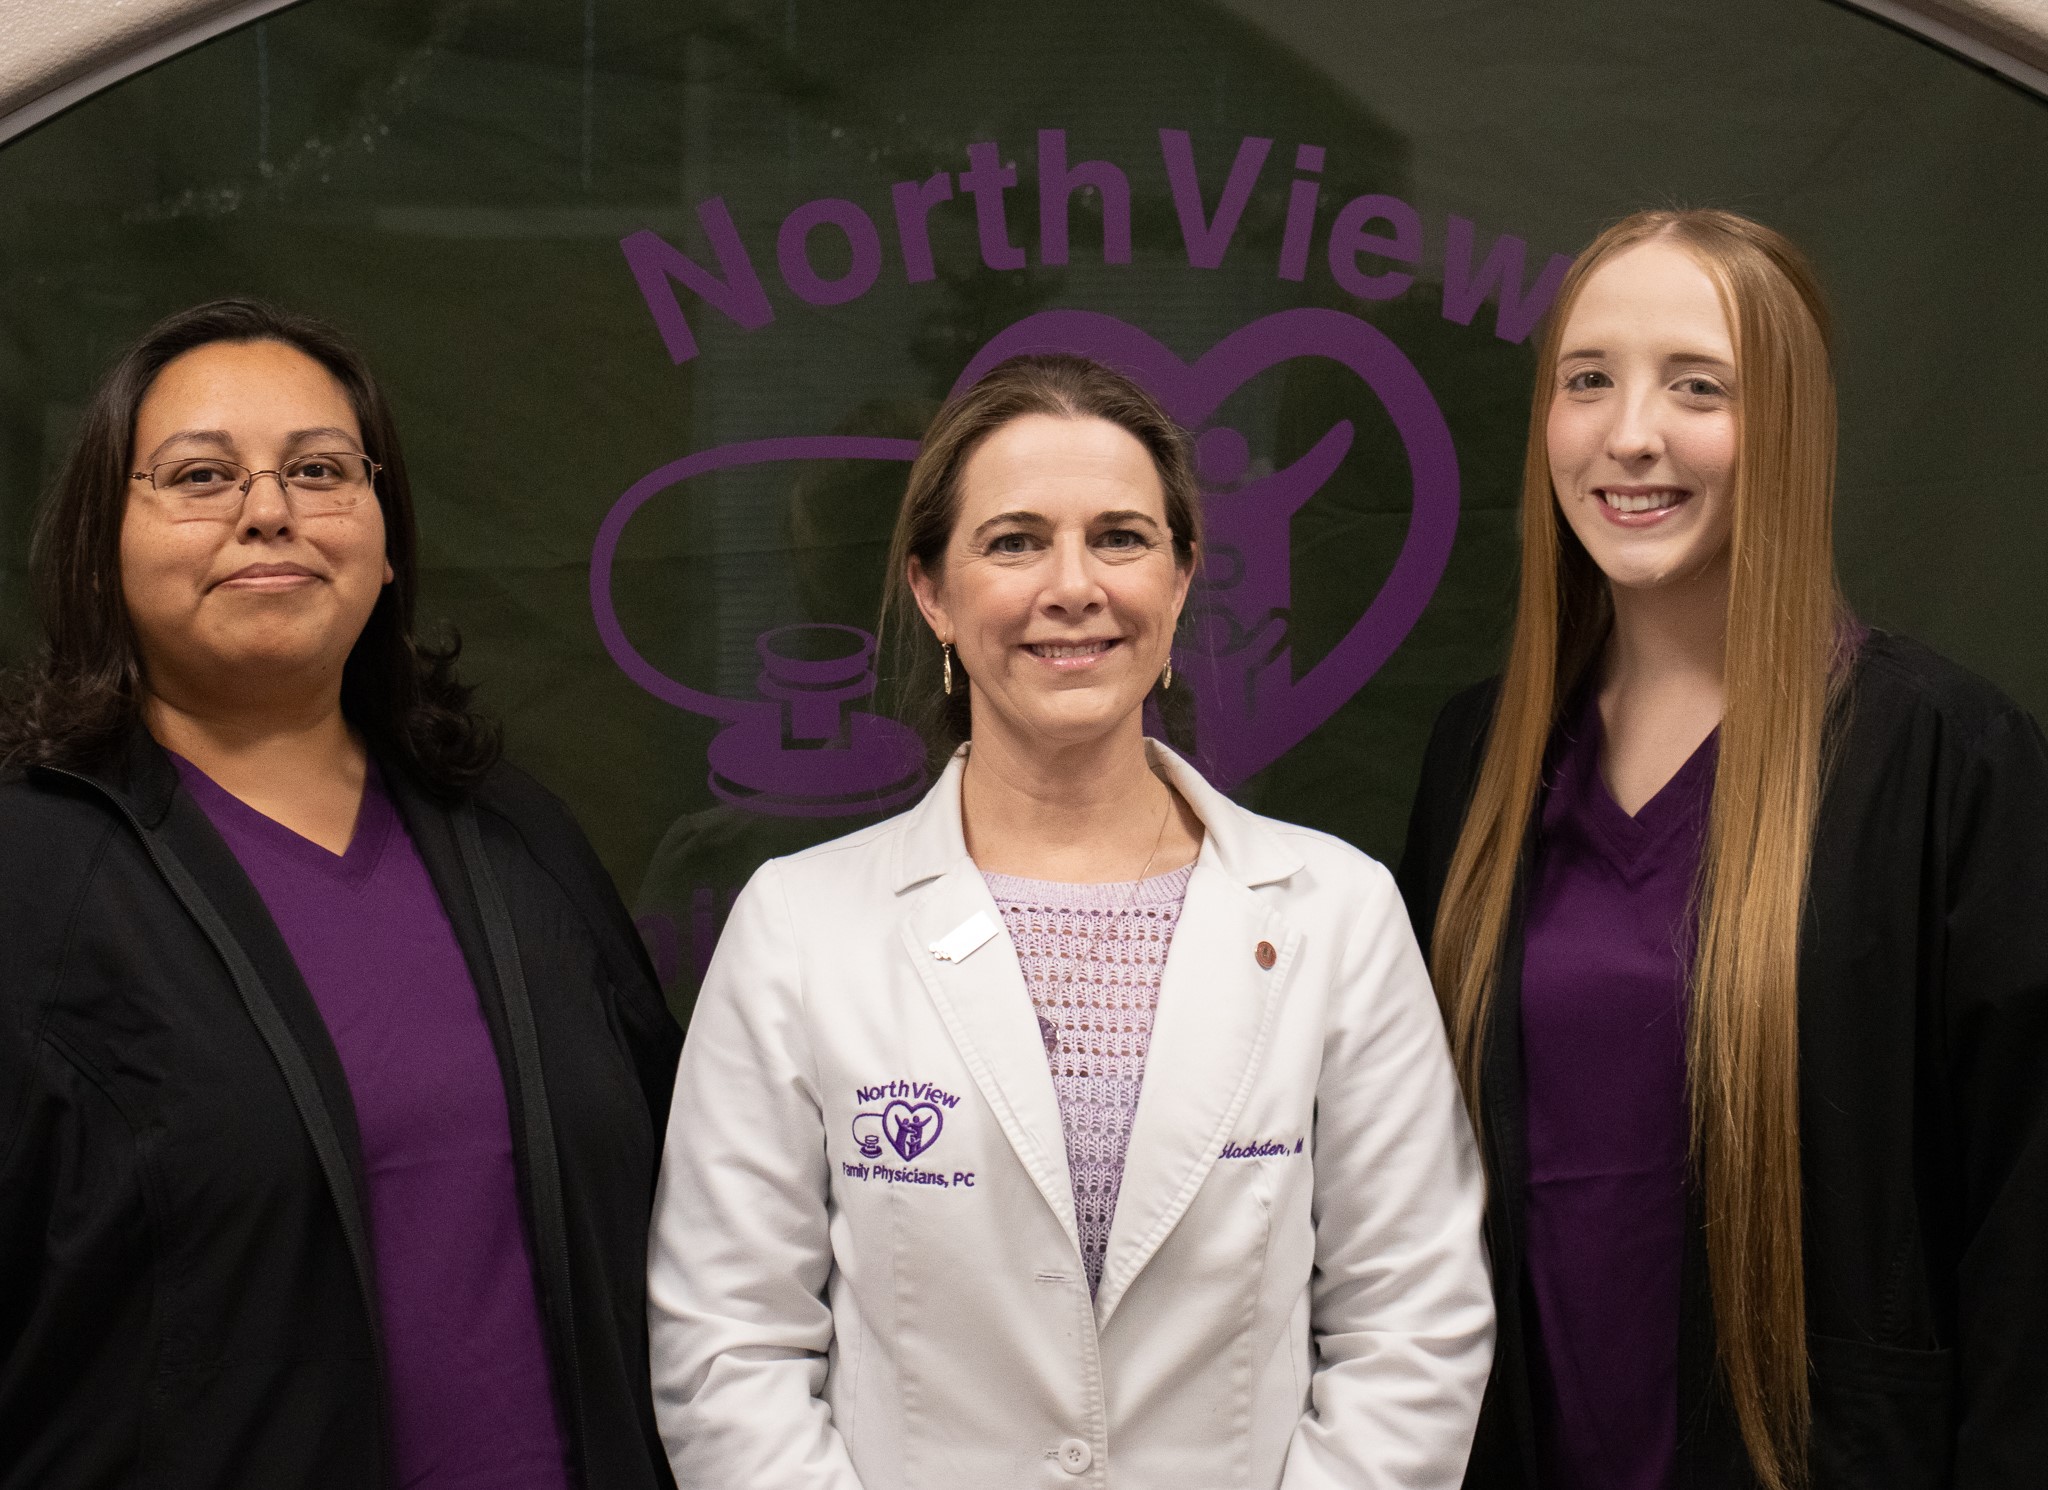 northview physicians picture